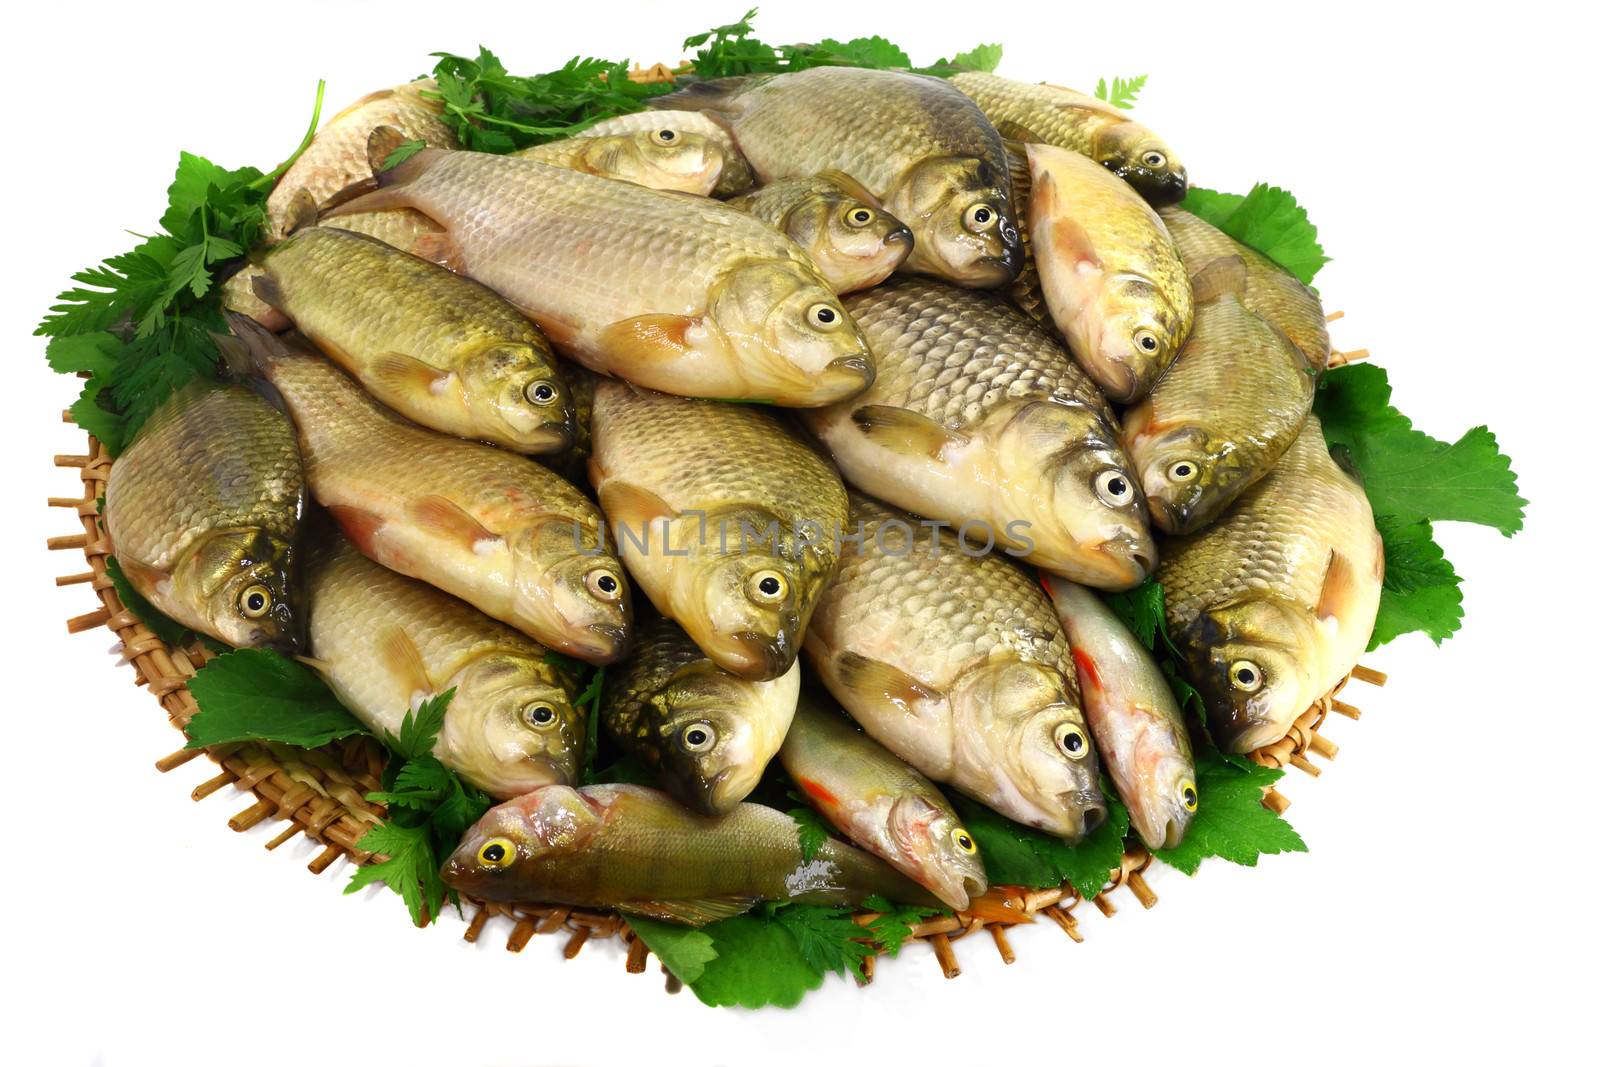 Carp and greens on a round dish. Presented on a white background.